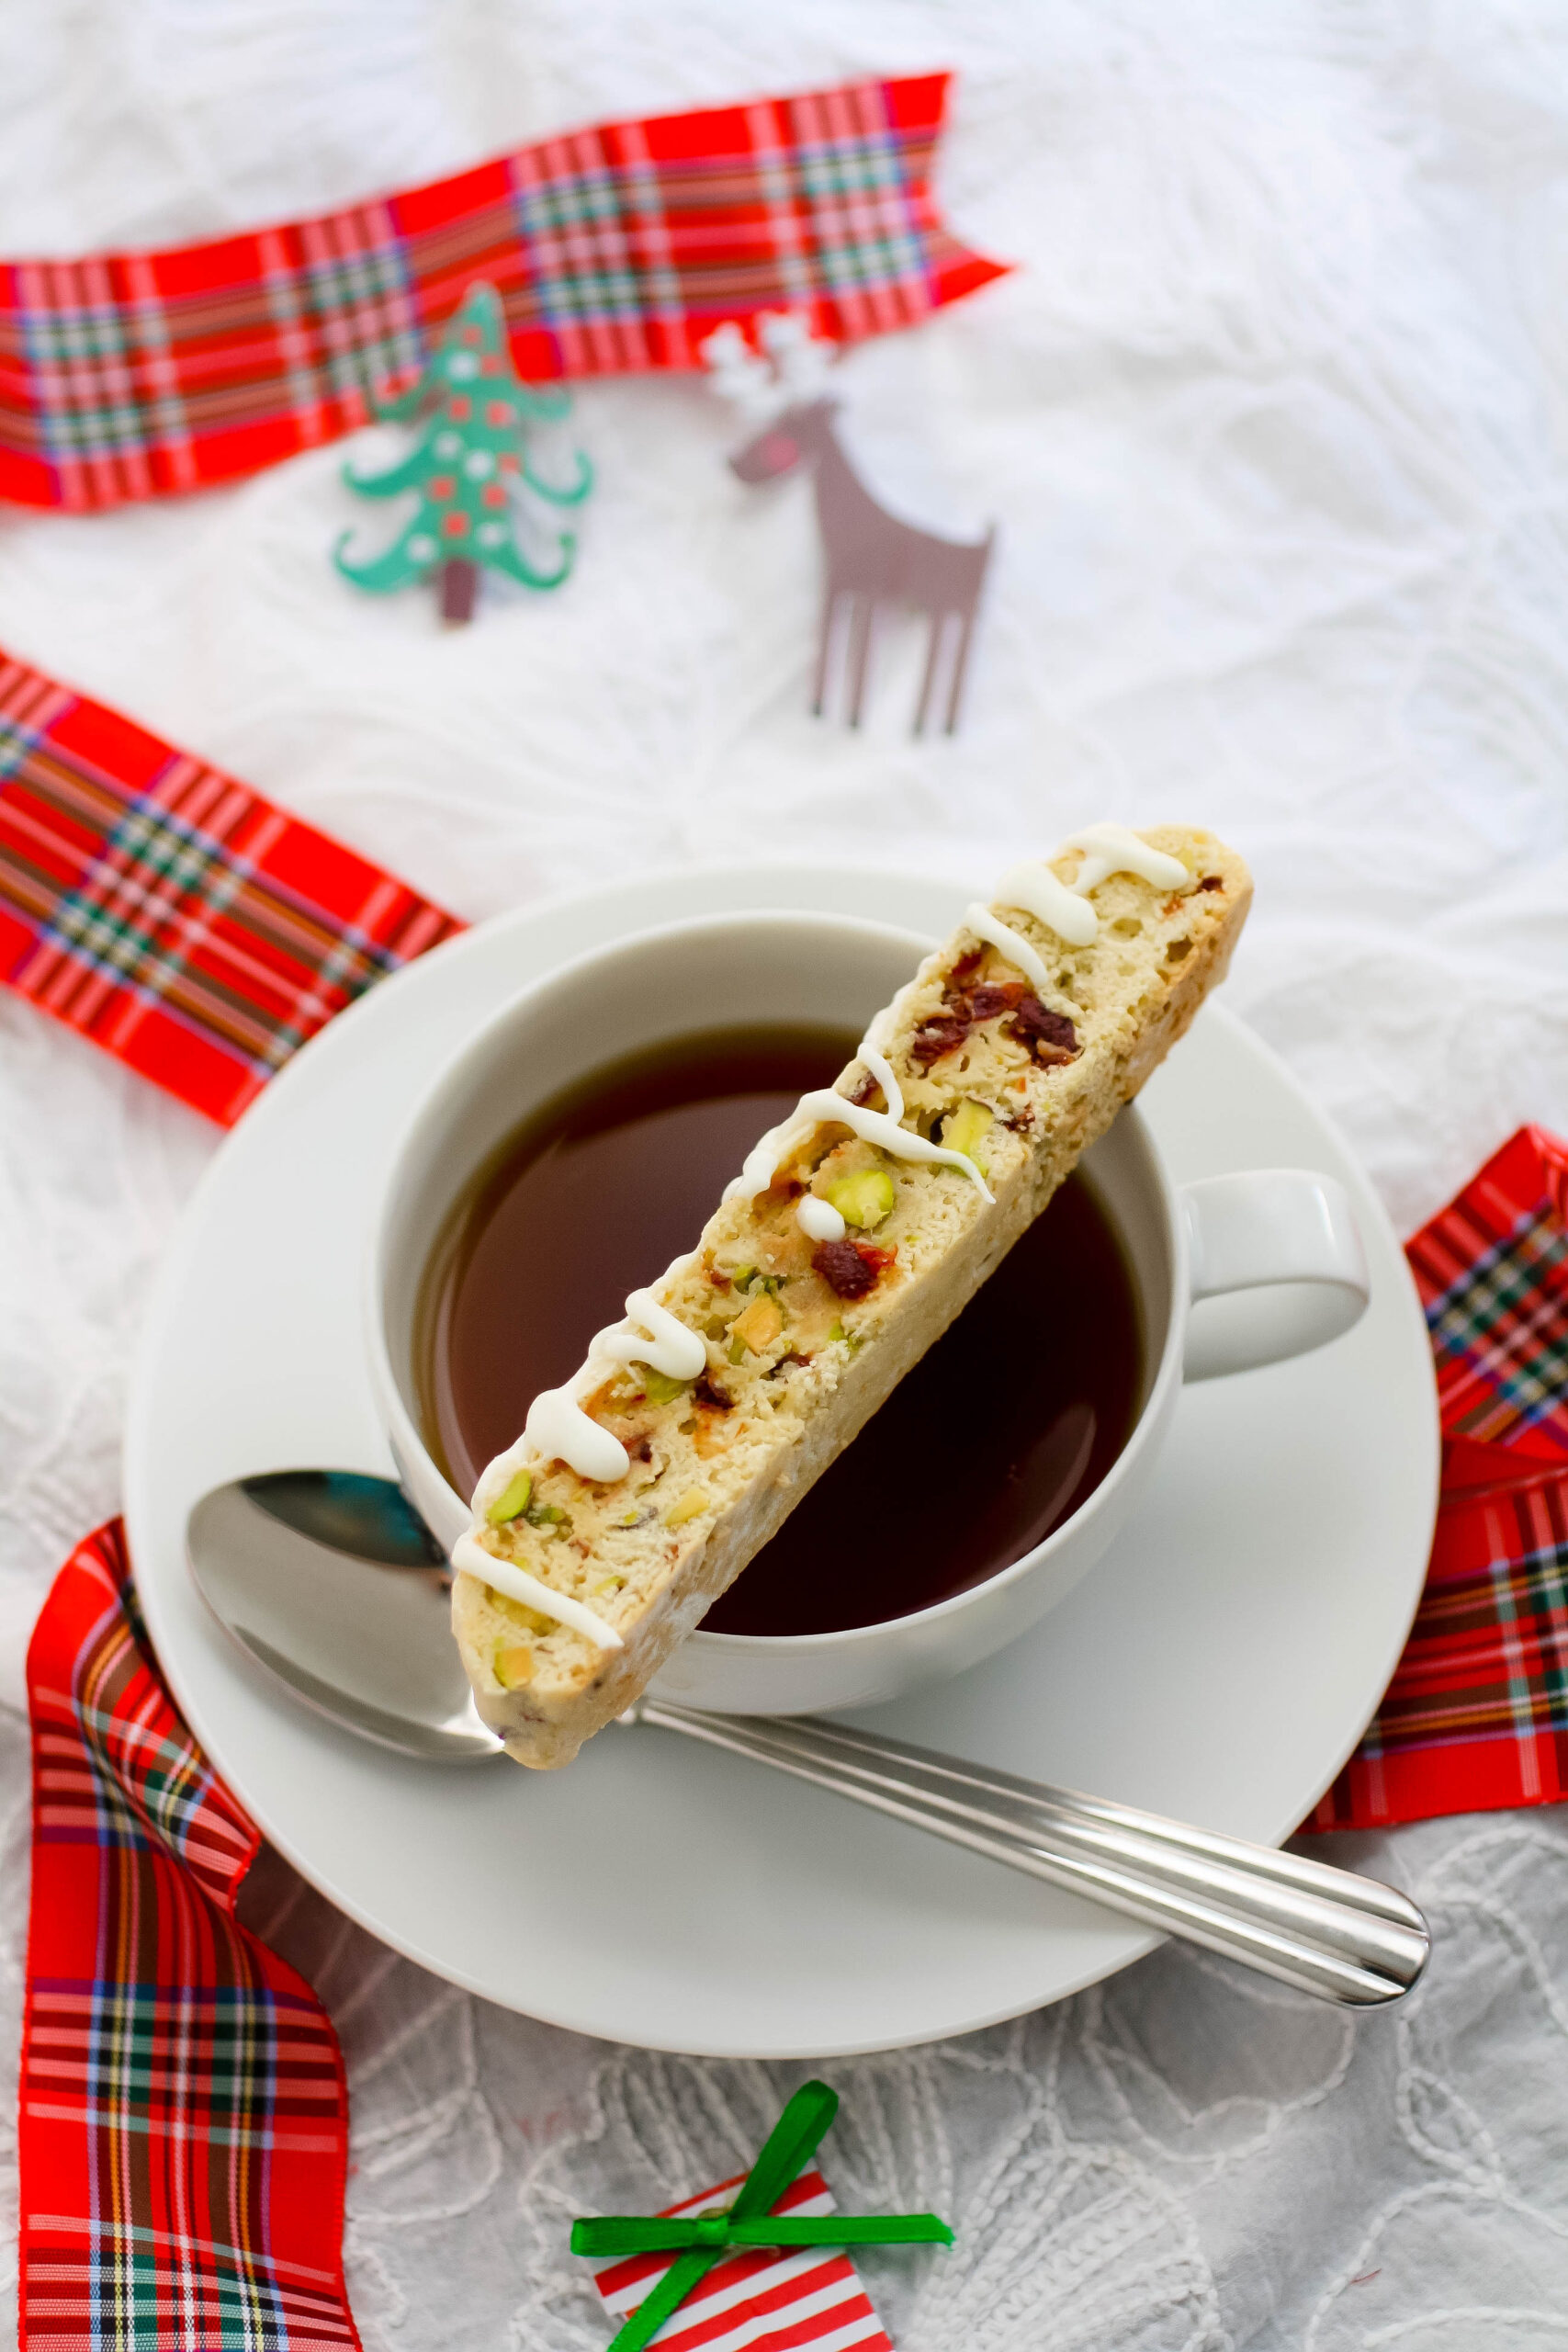 Cherry-Pistachio Biscotti are lovely cookies for the season!